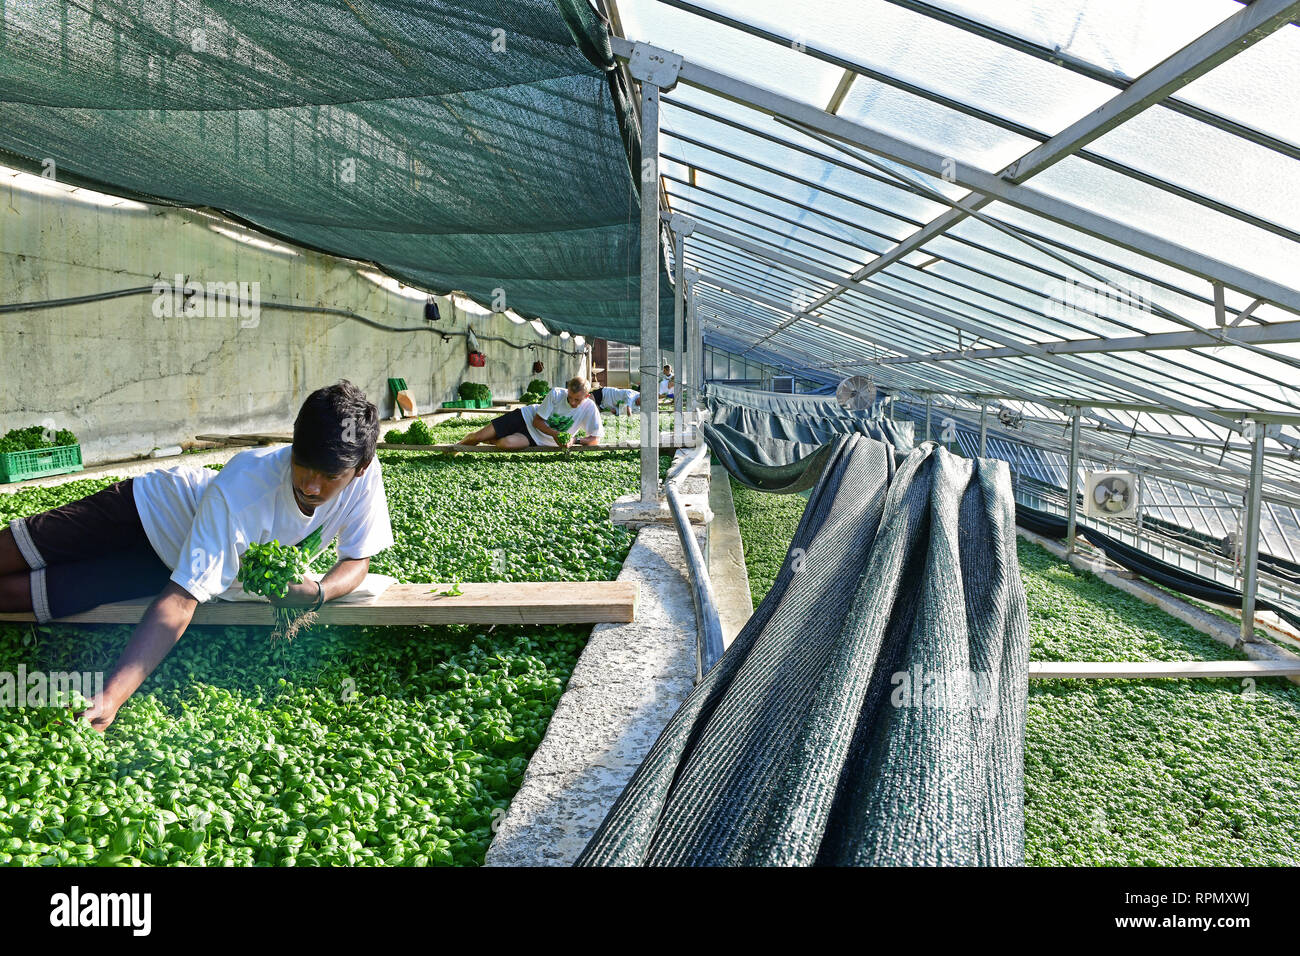 Basil picking by hand at Azienda Agricola Ruggero Rossi, a family-run basil grower specialised in the cultivation of DOP Genoese basil. Stock Photo